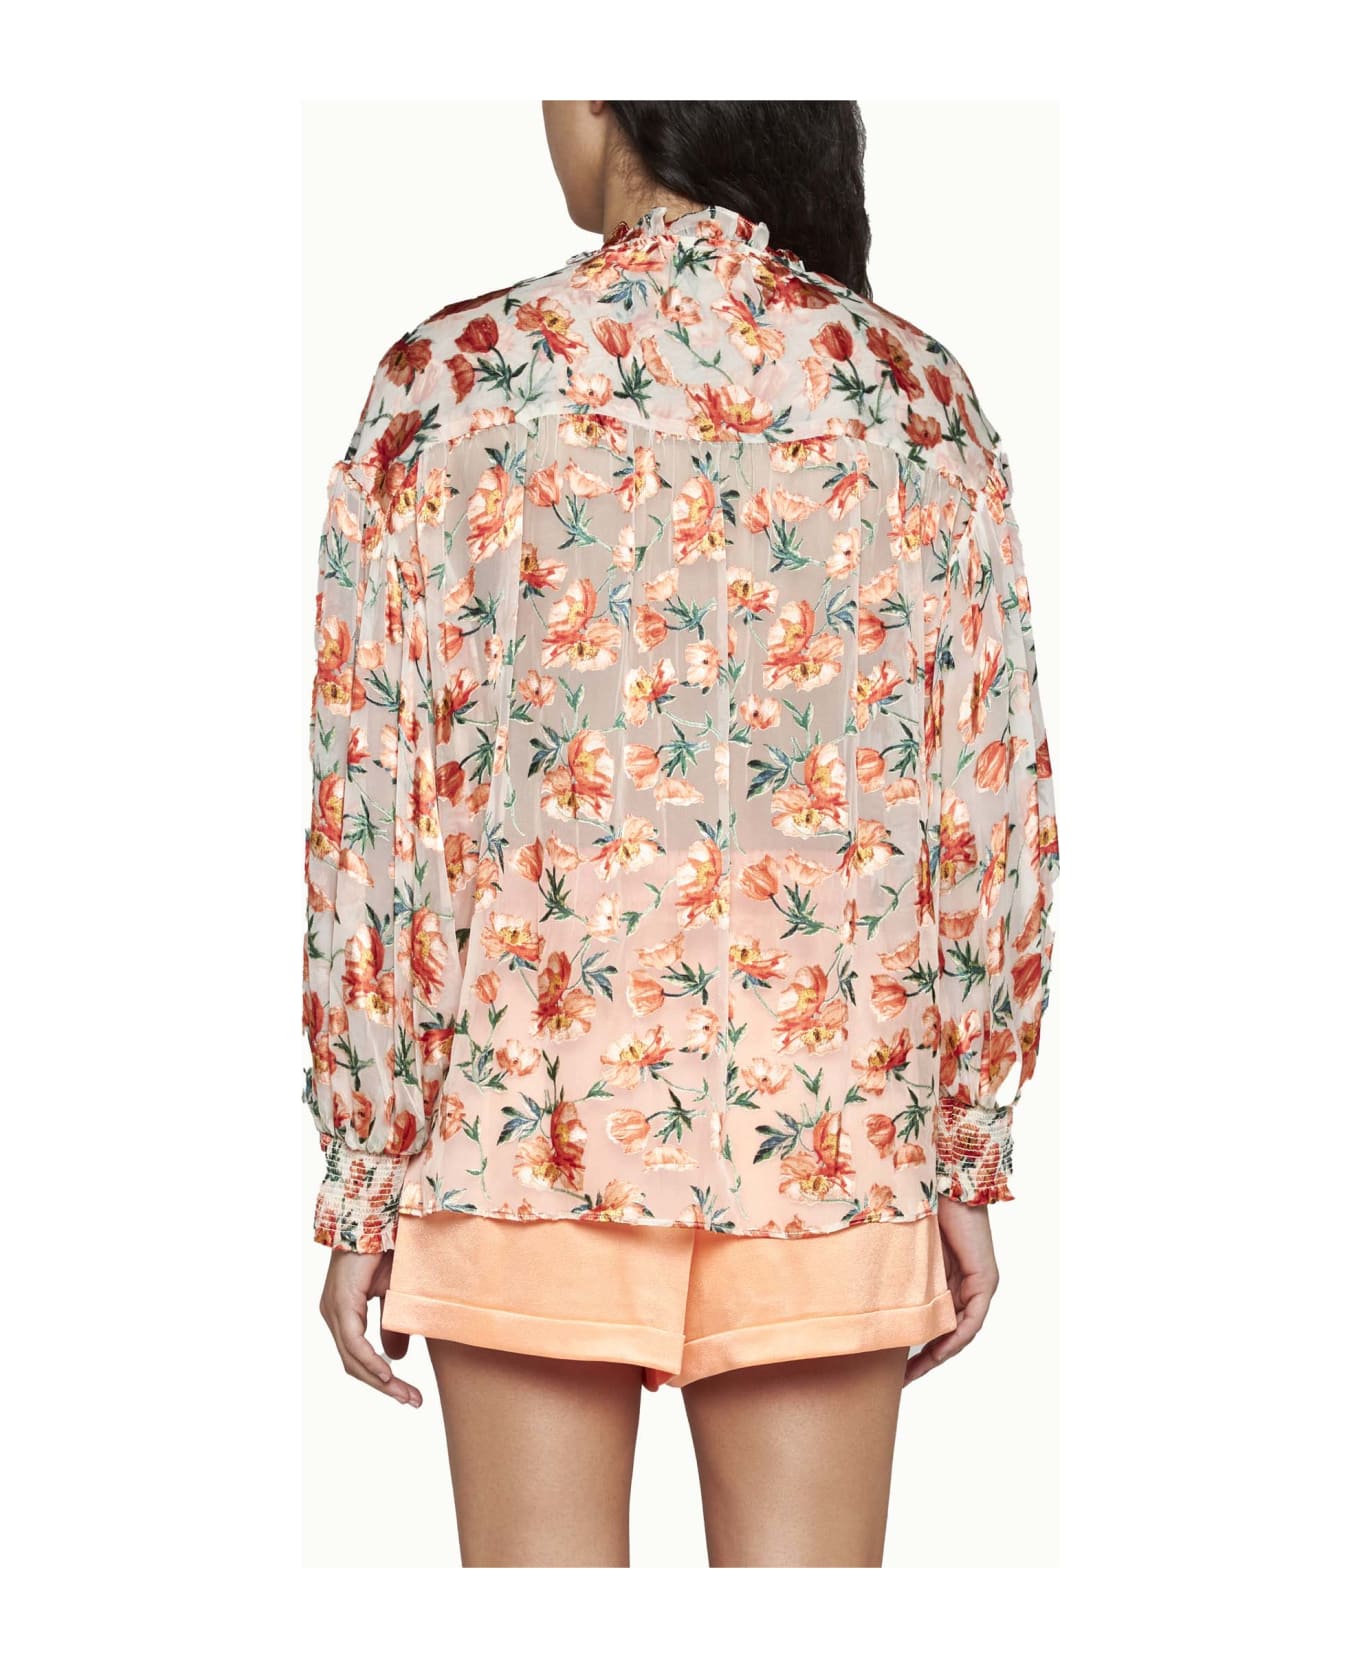 Alice + Olivia Shirt - Falling for you off white ブラウス